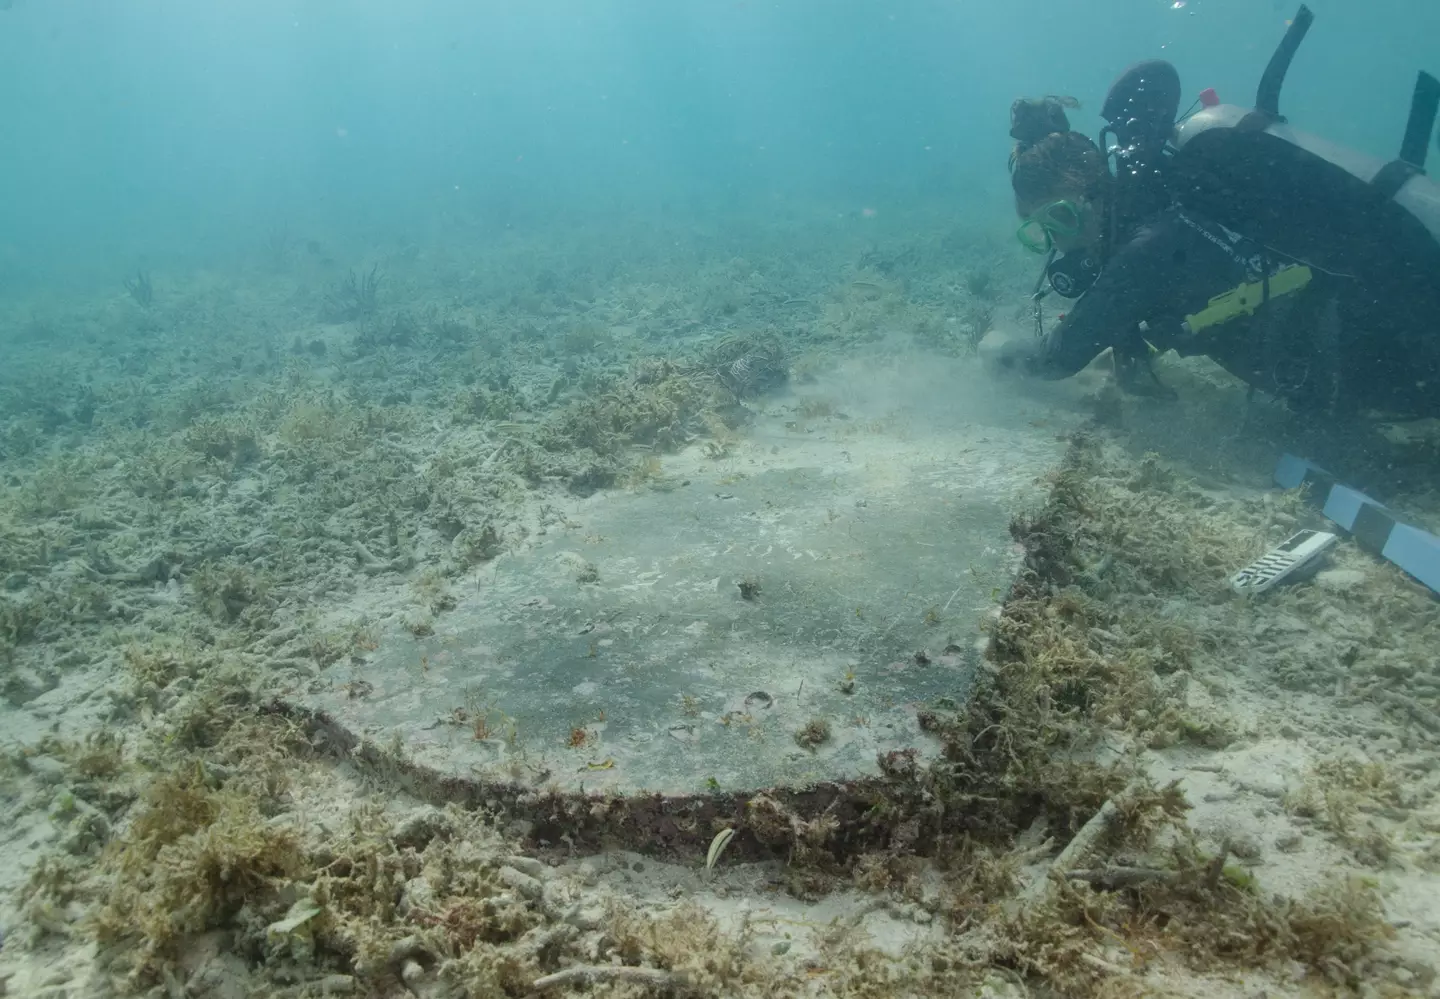 Divers found a large tombstone at the archeological site.